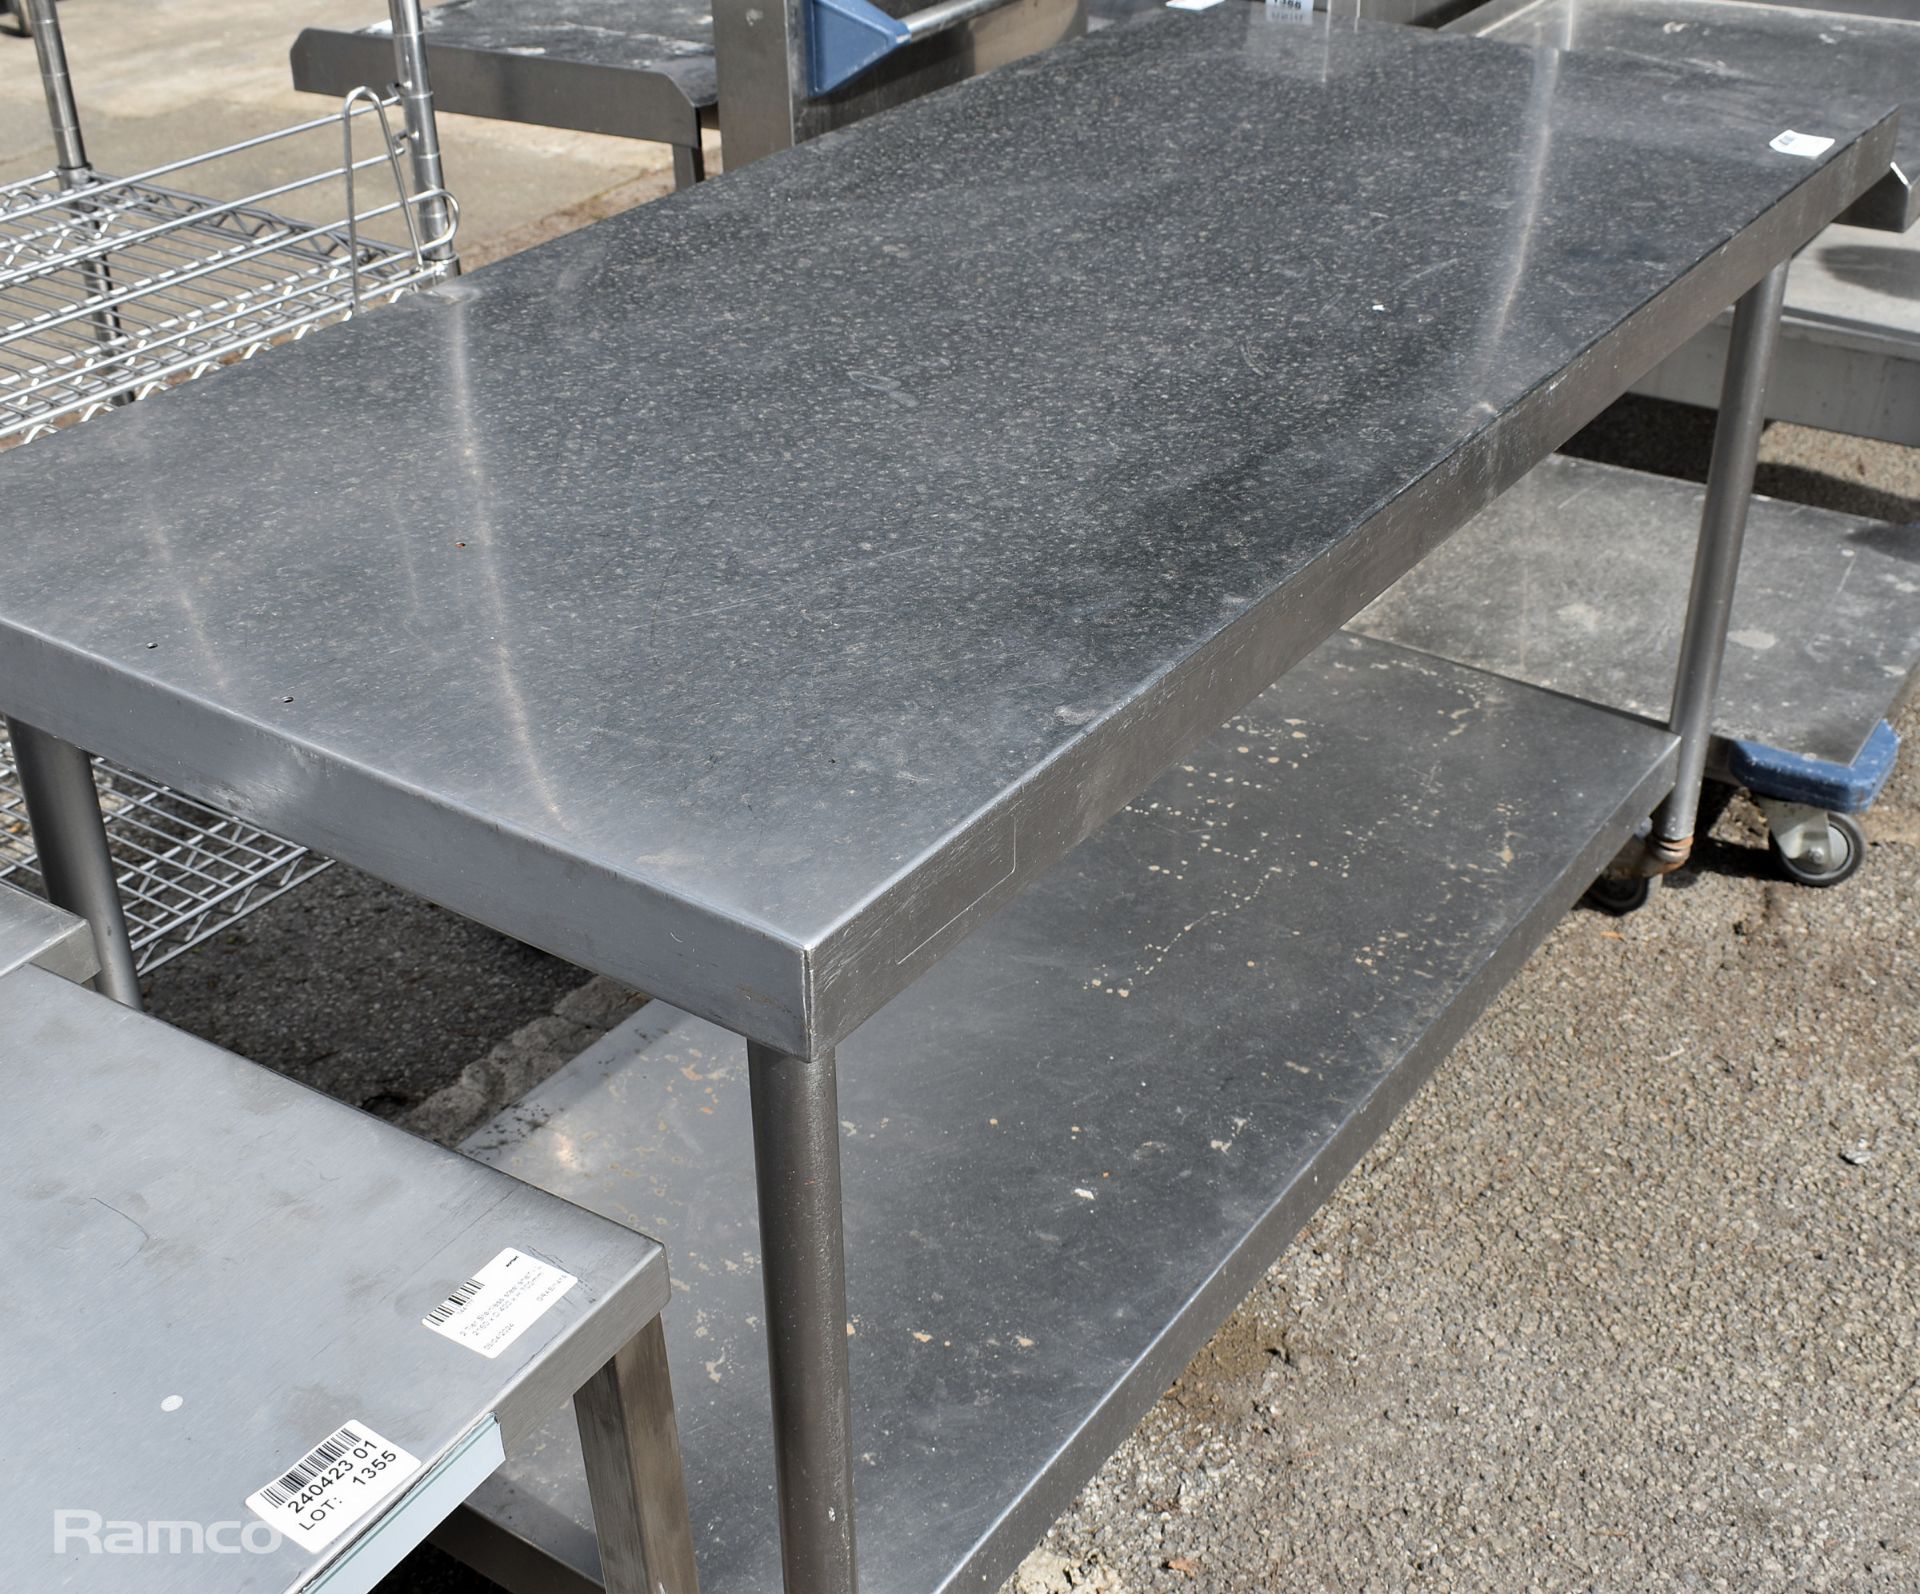 Stainless steel mobile workbench / table with bottom shelf- W 1500 x D 700 x H 835mm - Image 3 of 6